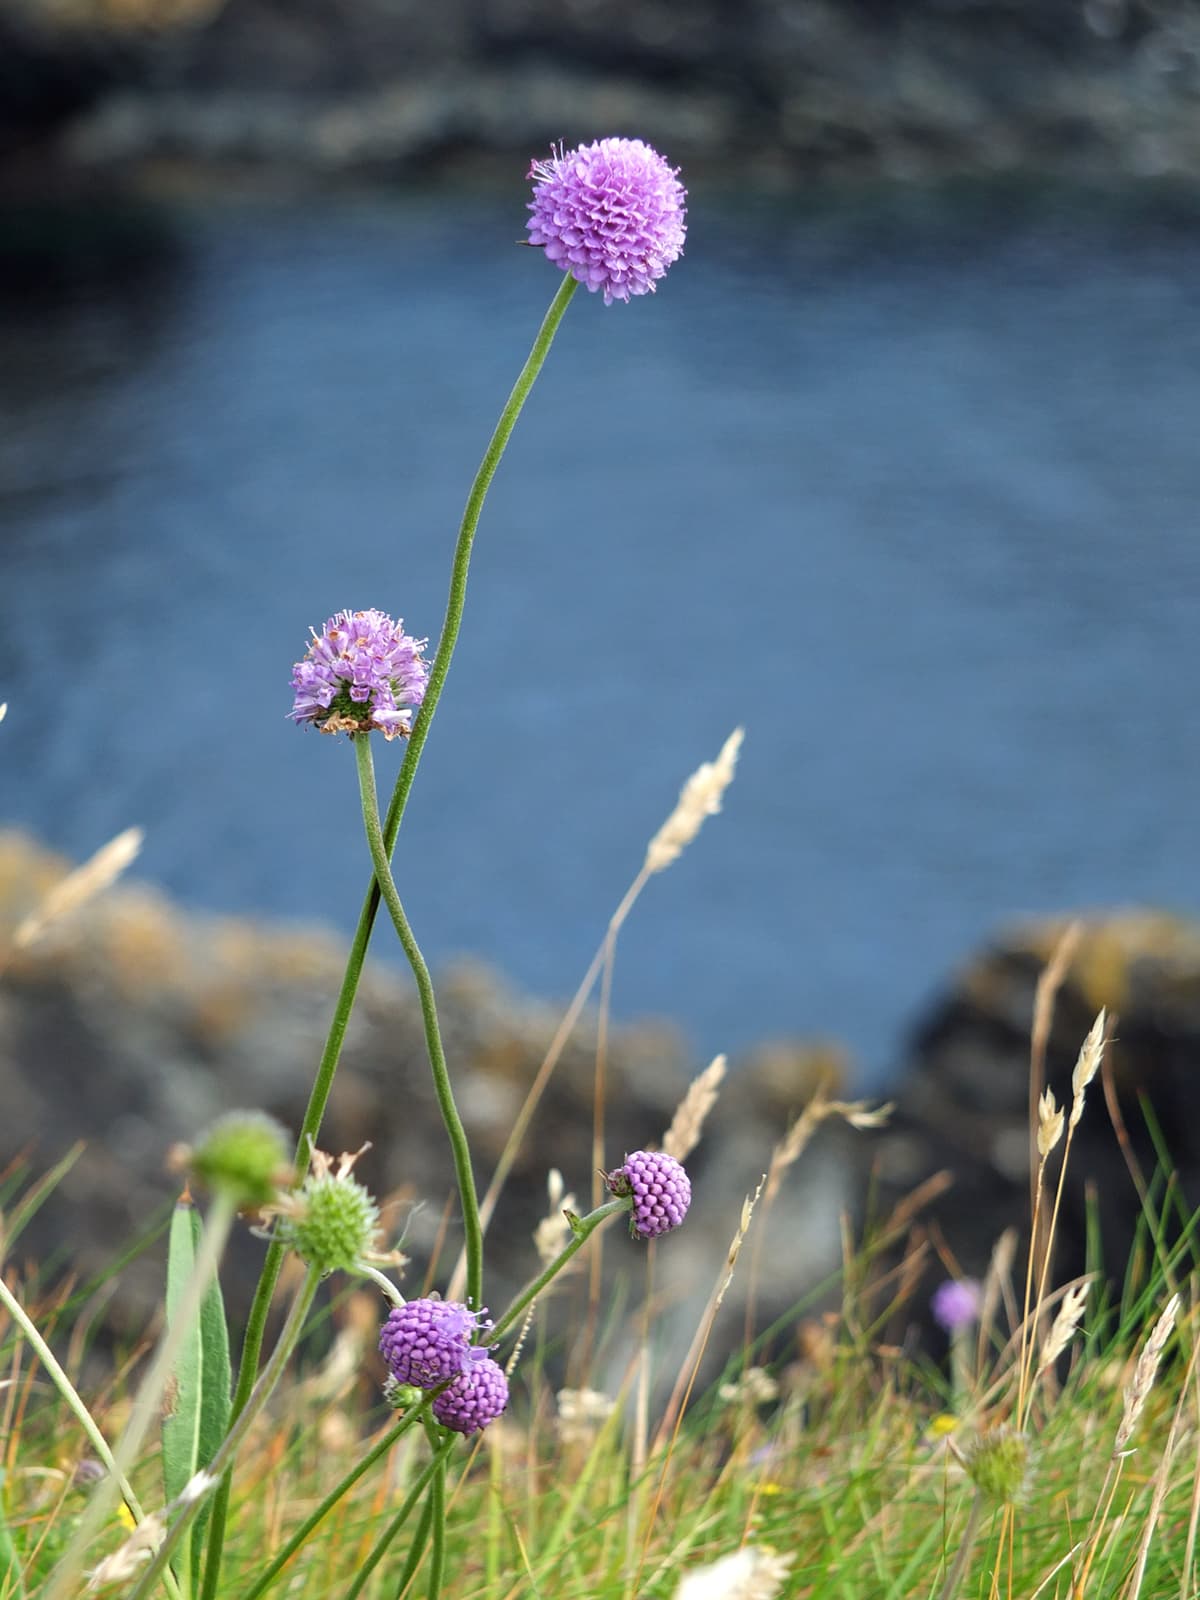 Image of devil's bit scabious, with it's blue pom-pom like flower on the top of a long leafless stem.